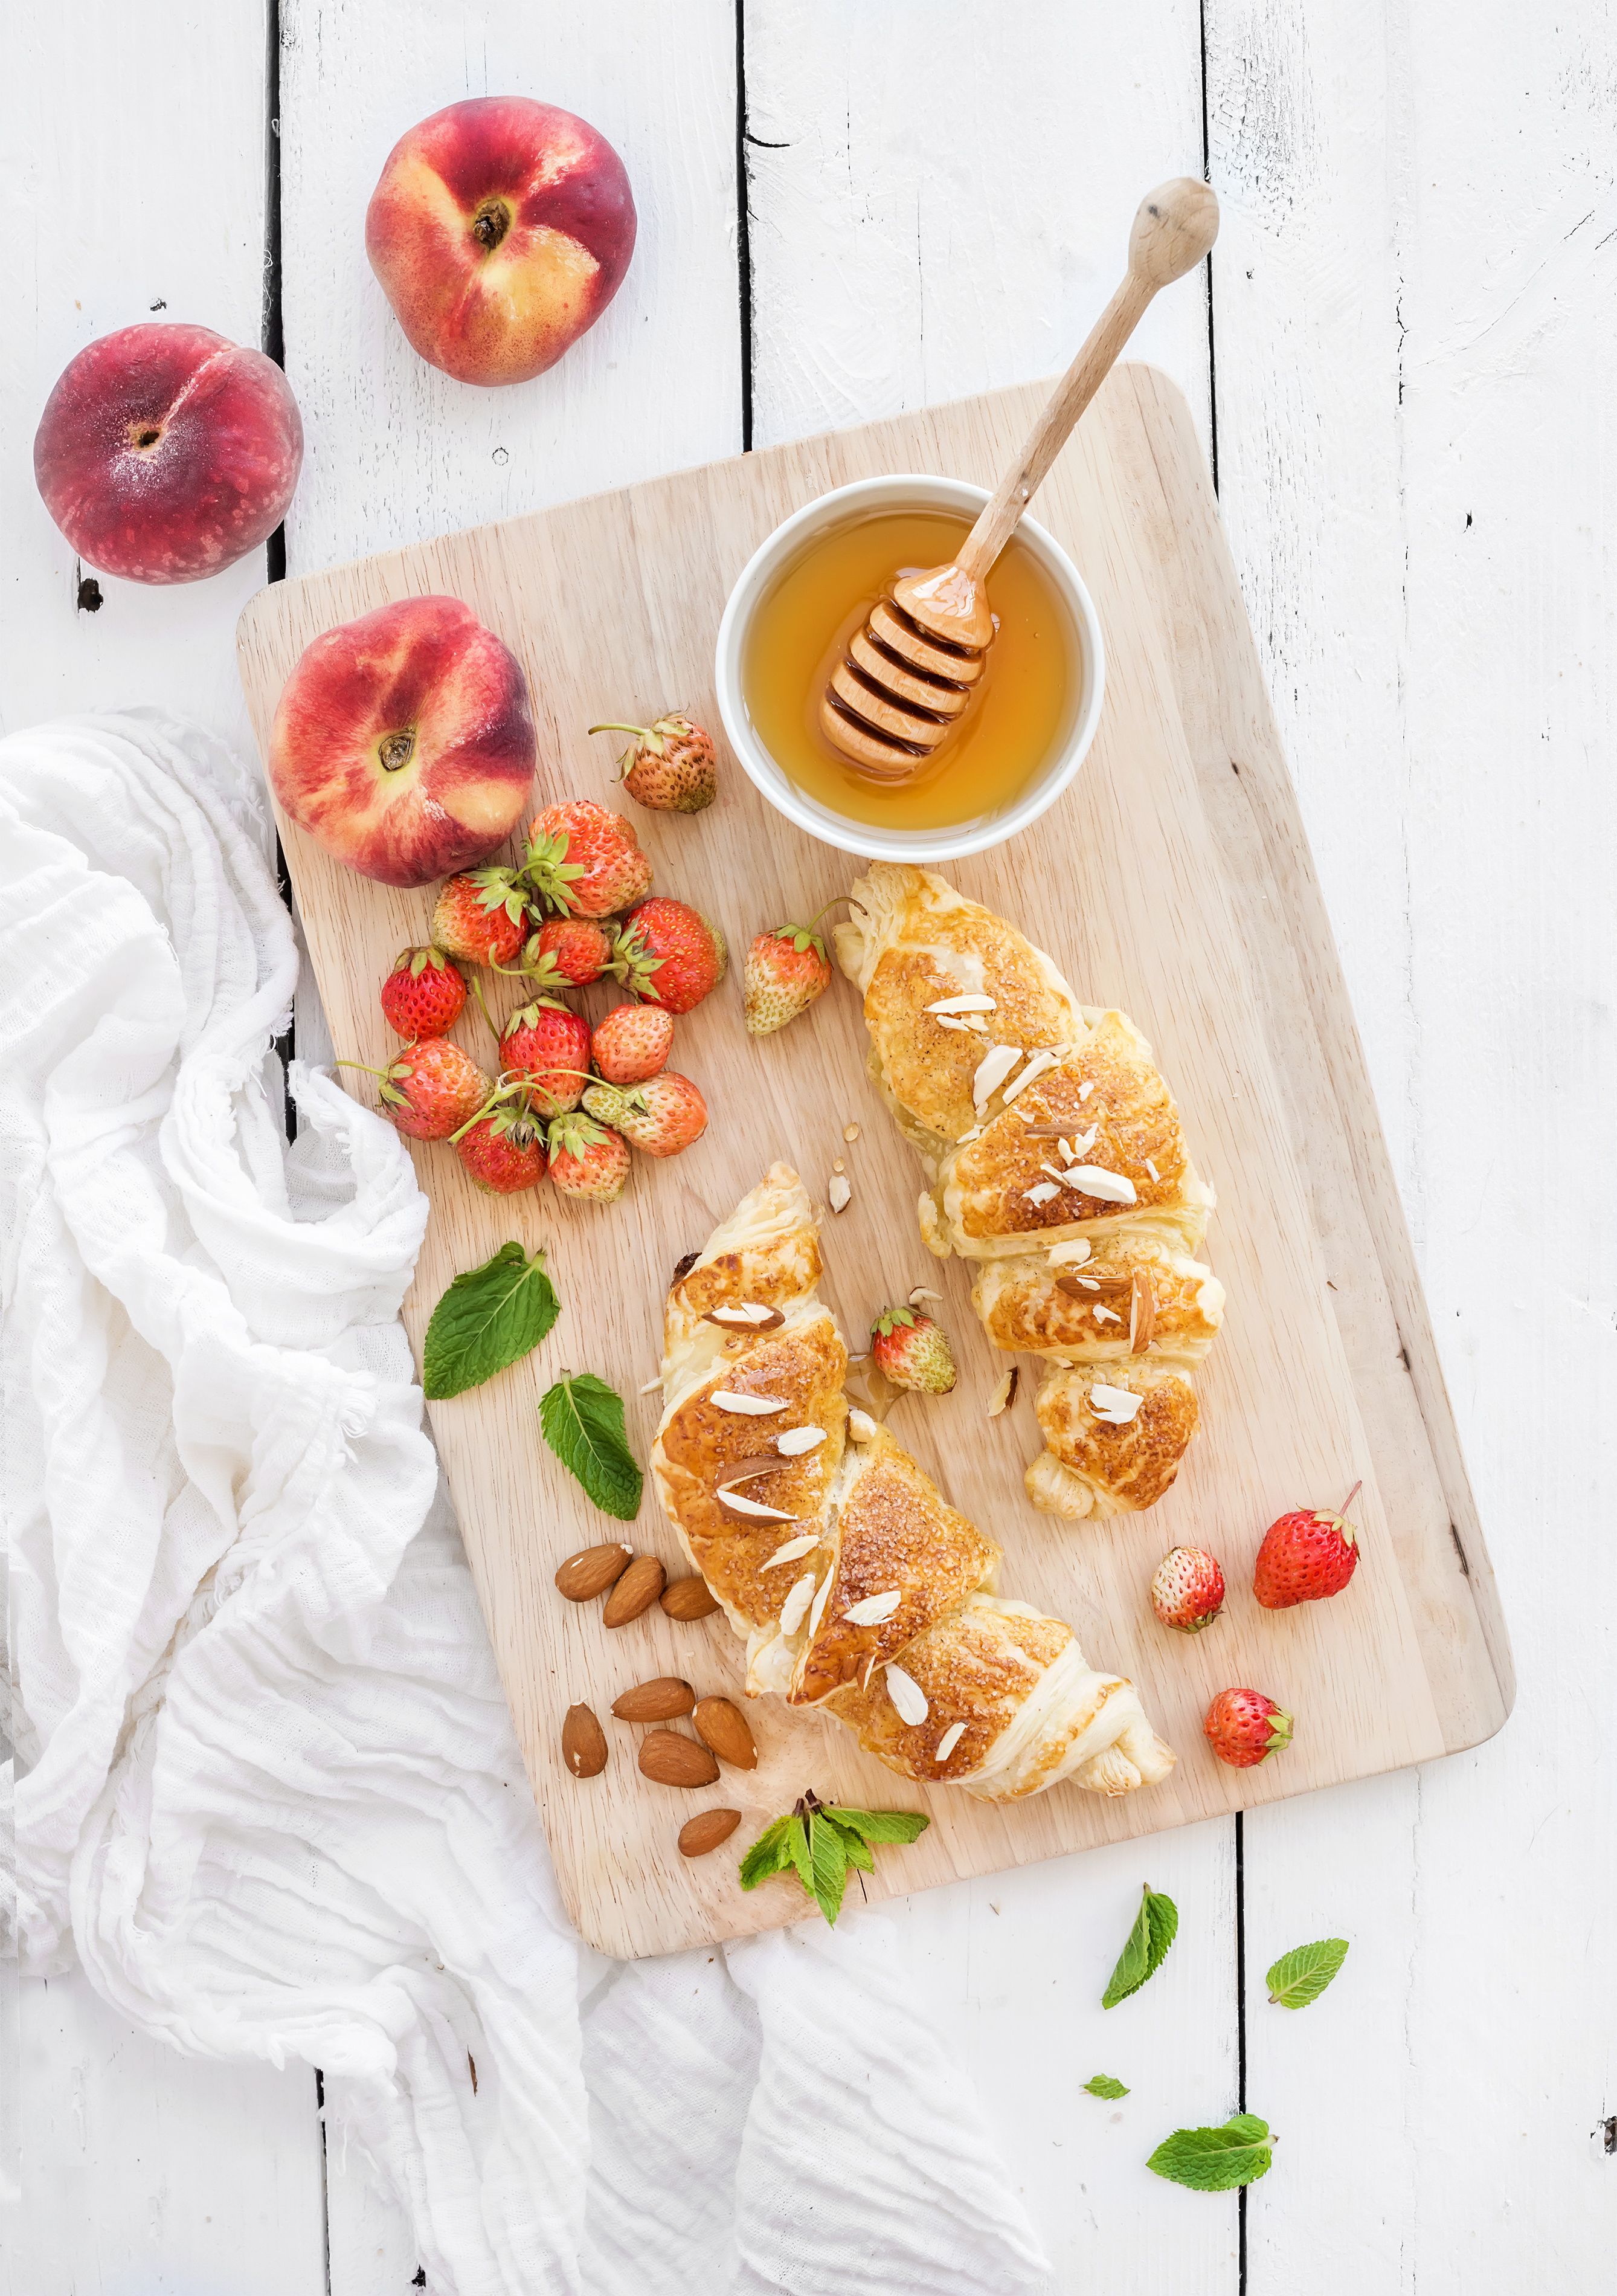 Photo Honey Croissant Peaches Food Cutting board Nuts Wood 2677x3800